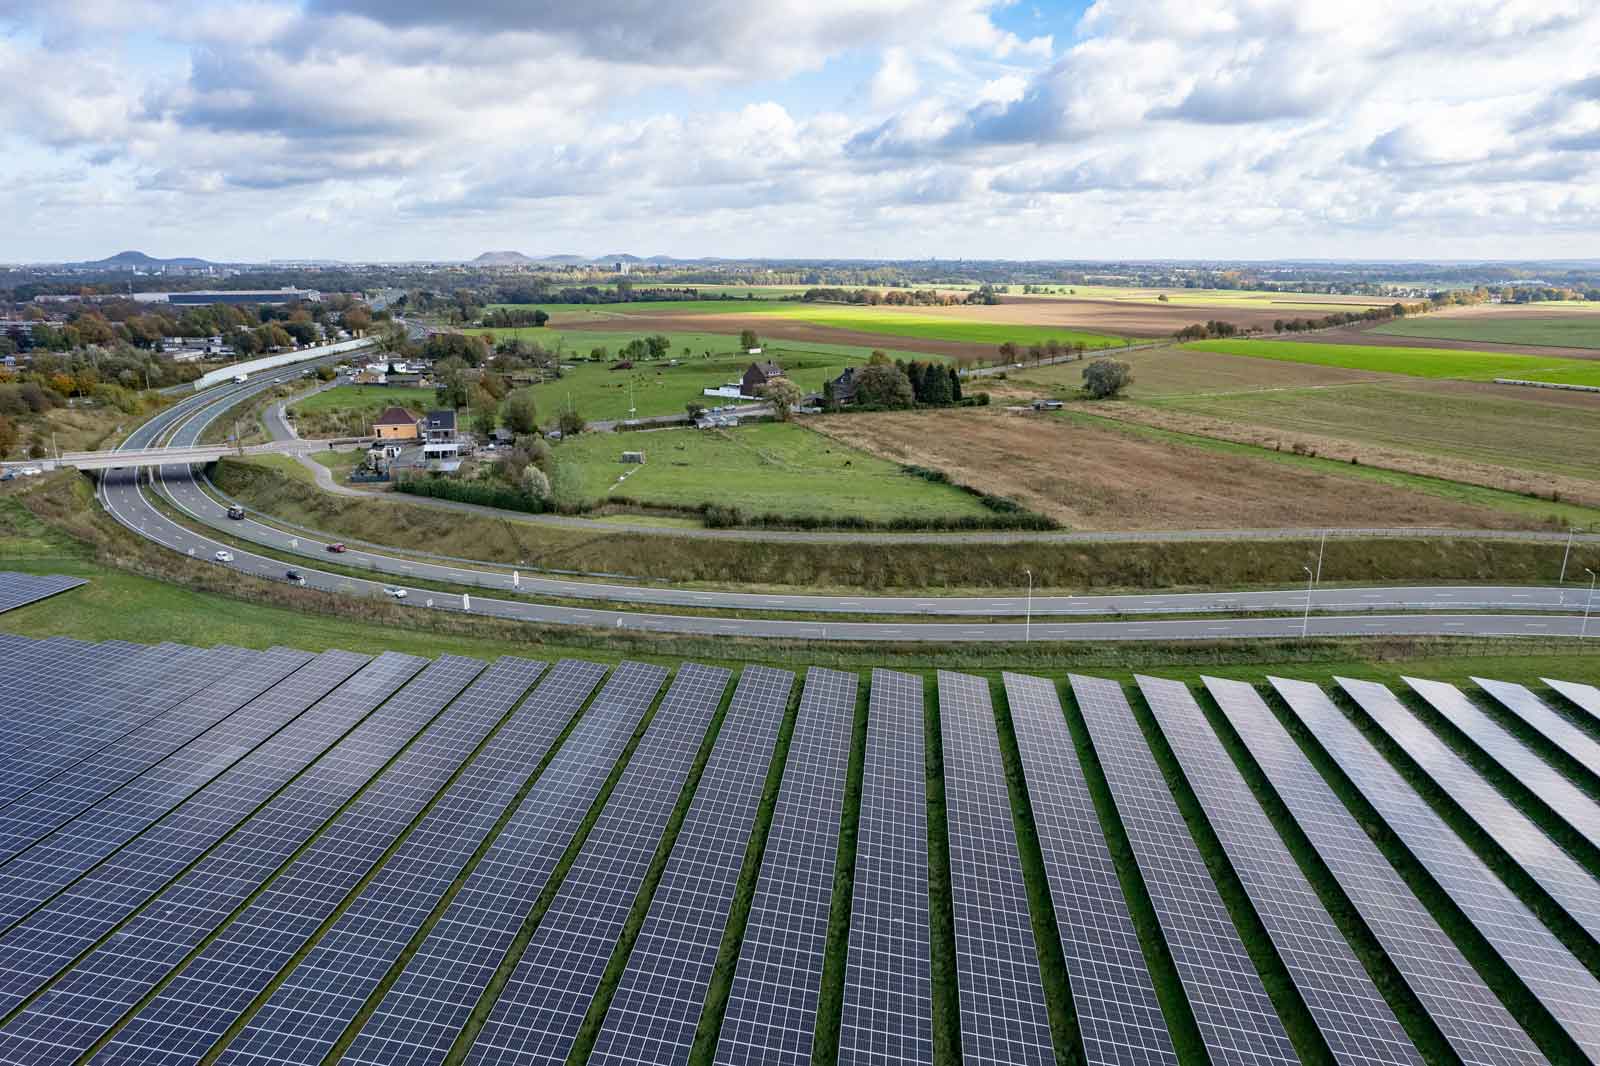 A solar park from above | Discover renewables at RWE